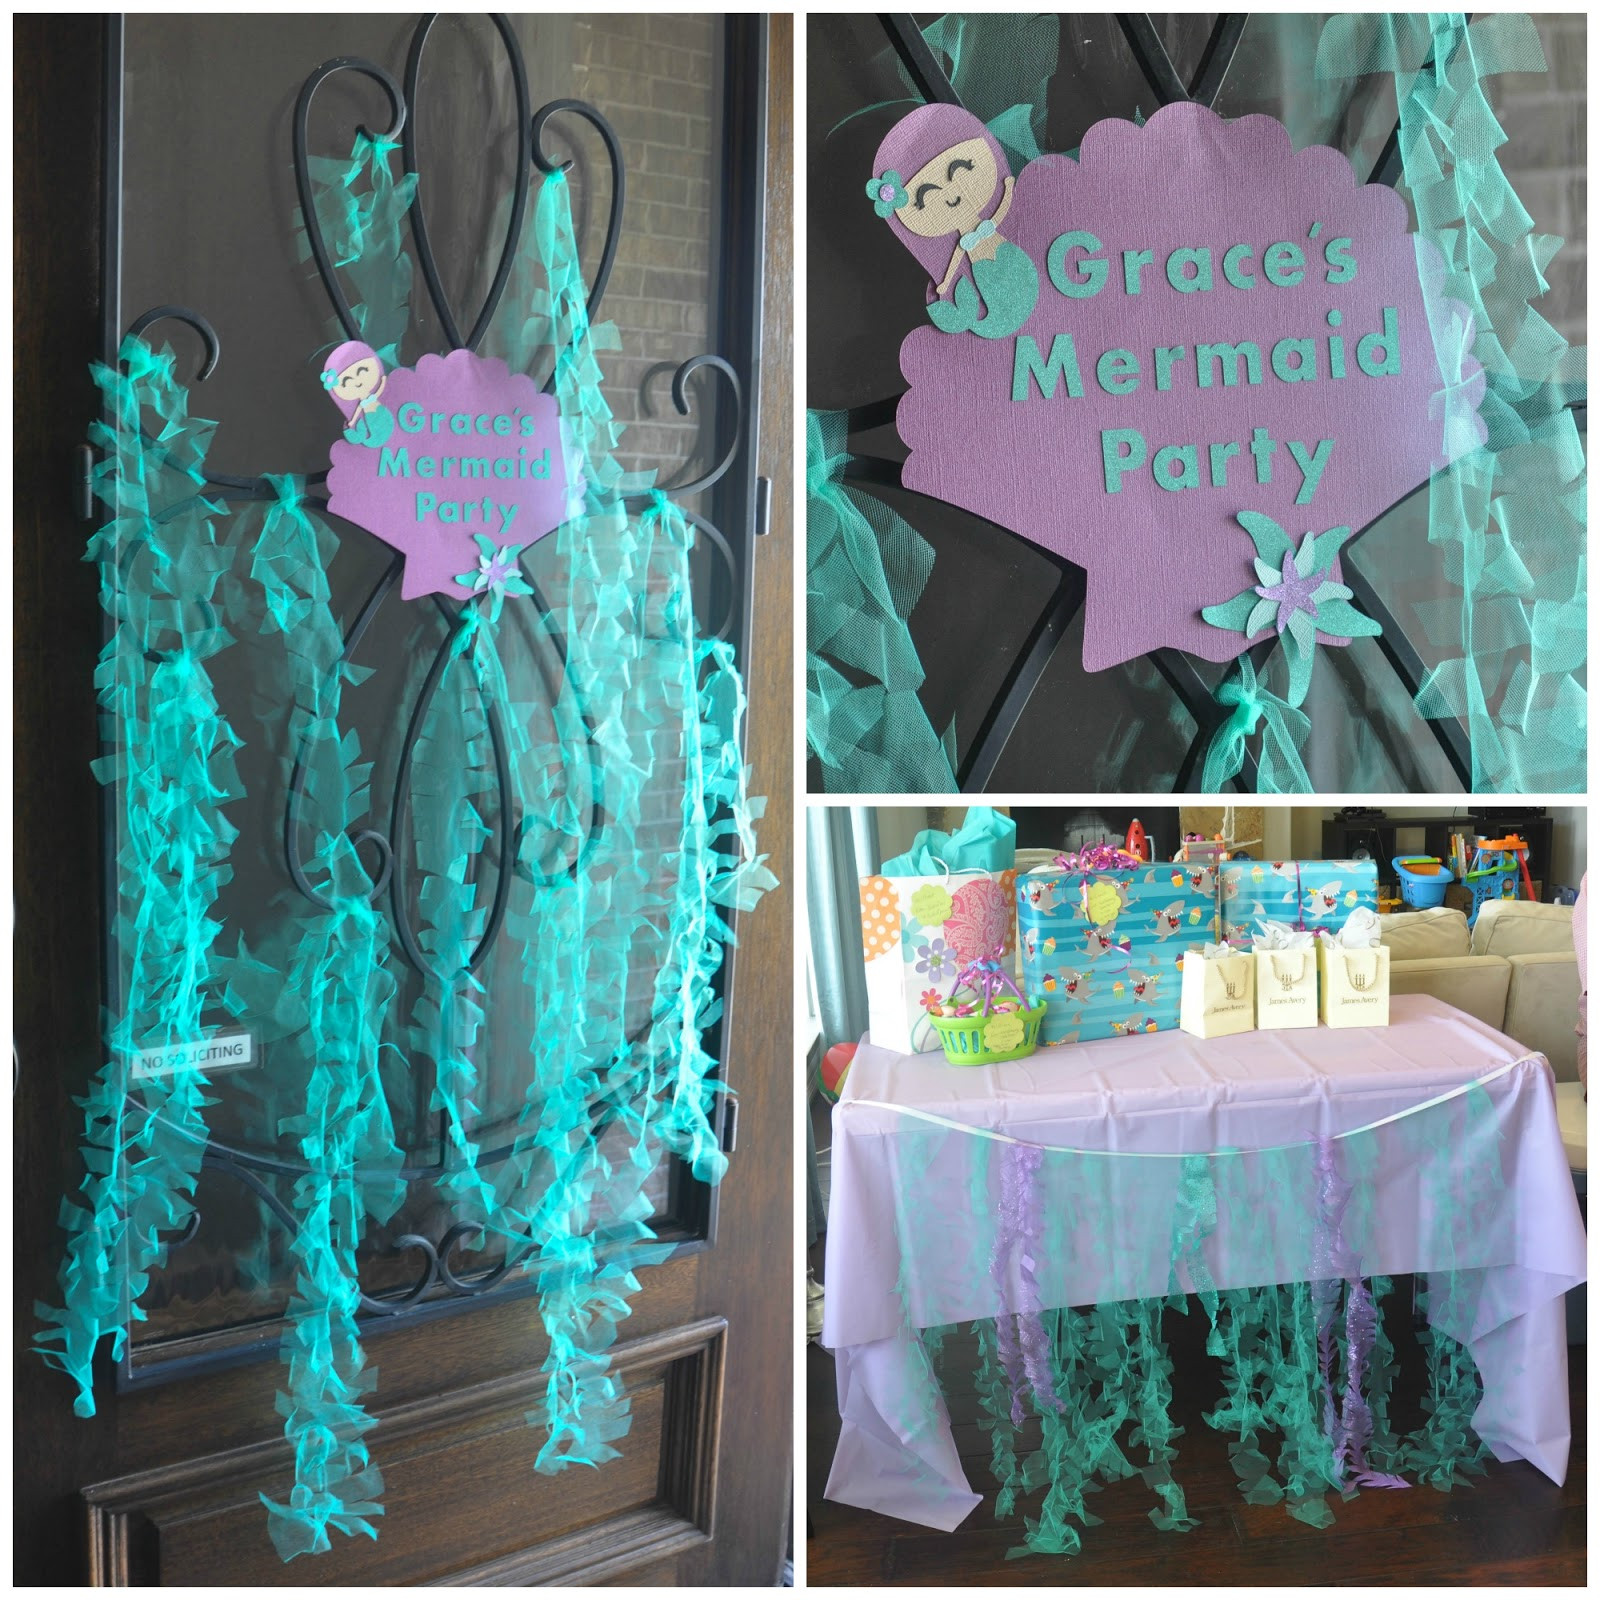 Little Mermaid Birthday Party Decoration Ideas
 these little loves Sparkly Mermaid Seaweed